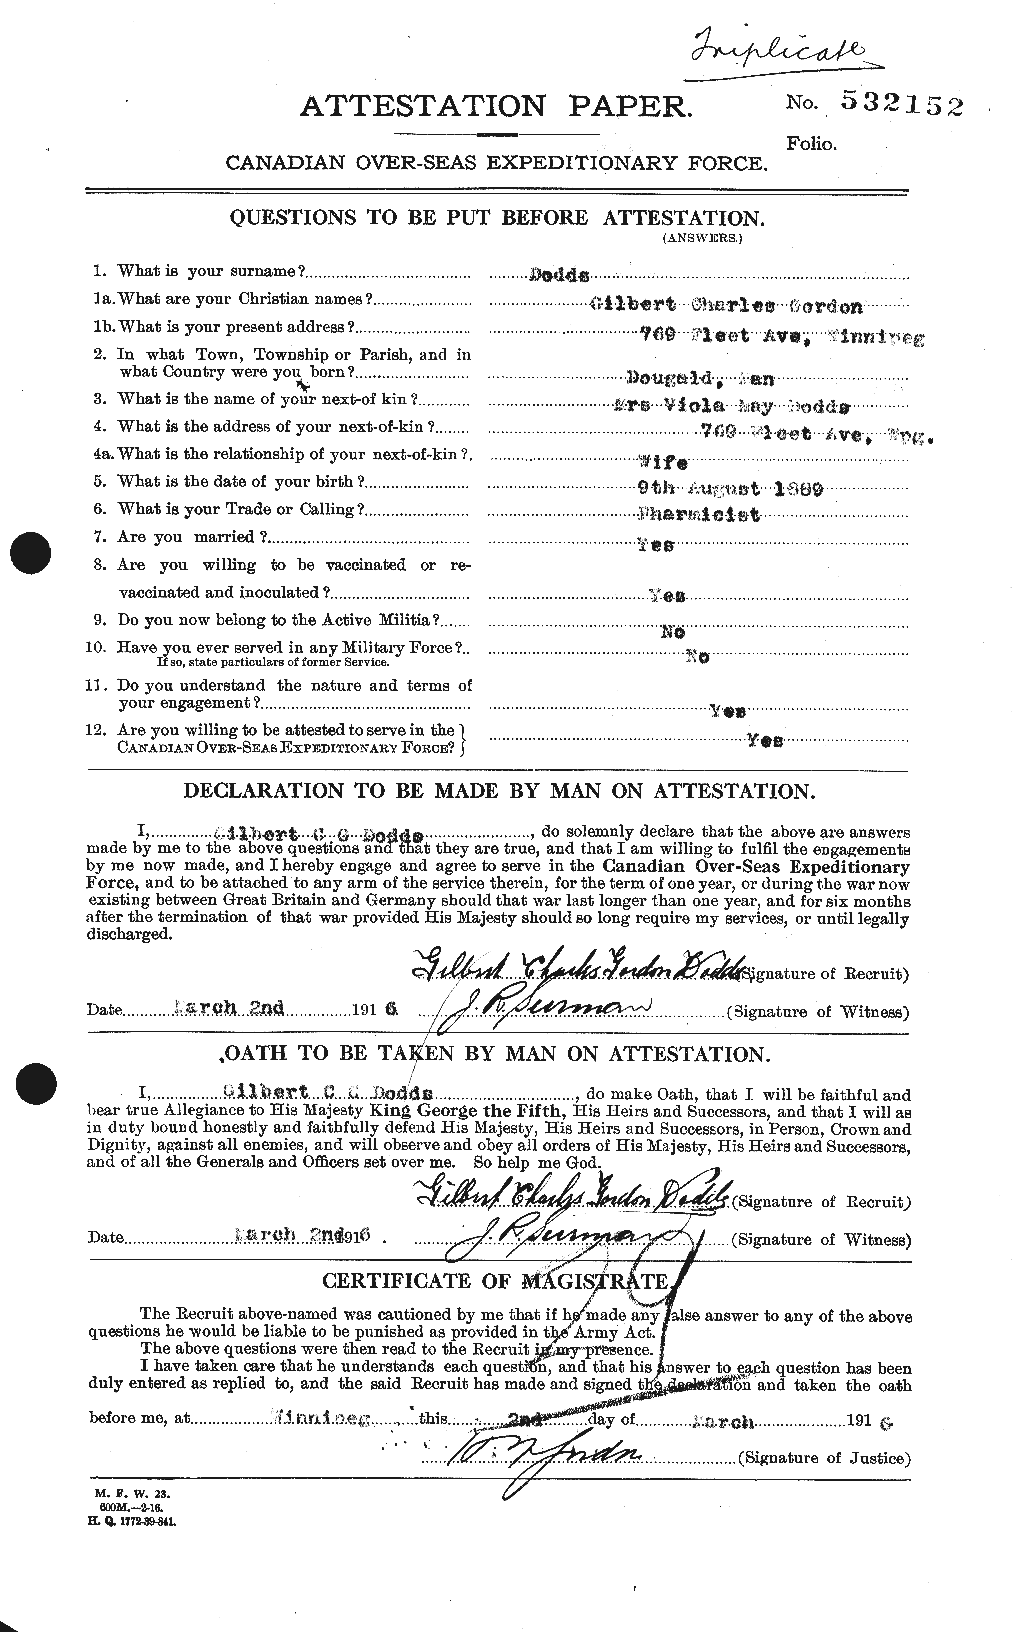 Personnel Records of the First World War - CEF 294380a